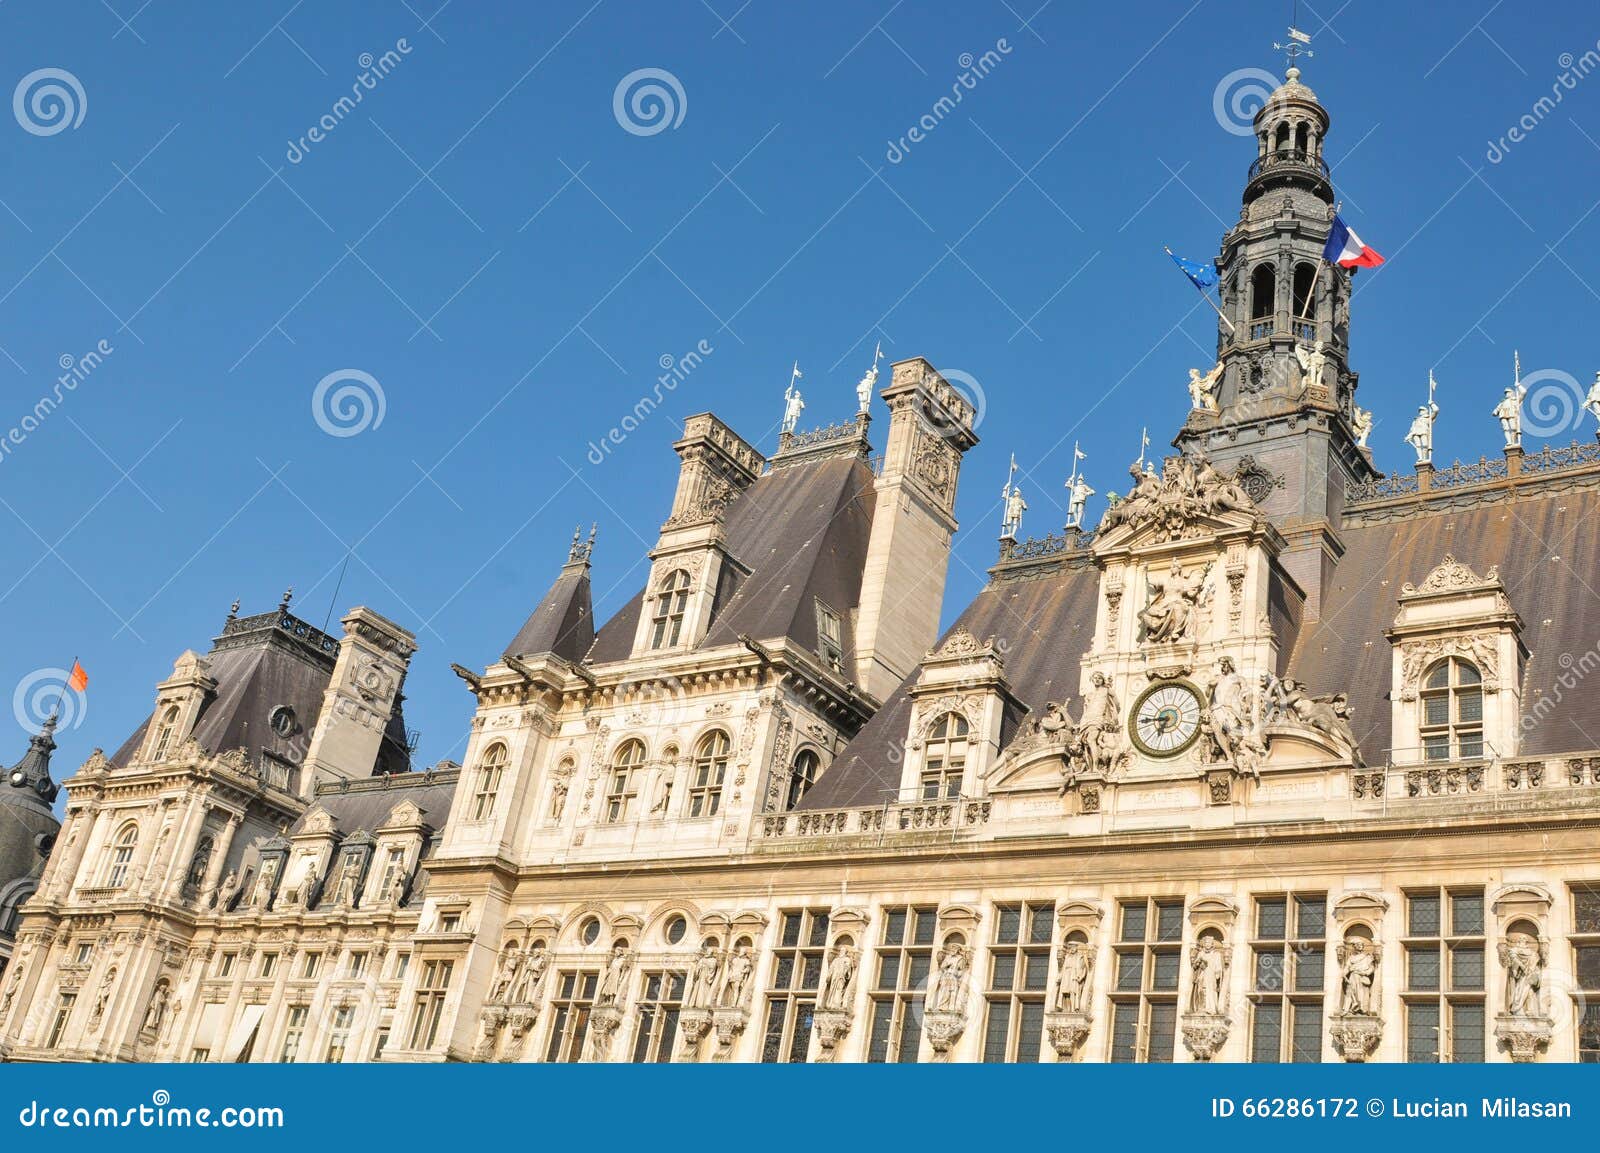 Ornate architecture stock photo. Image of history, culture - 66286172